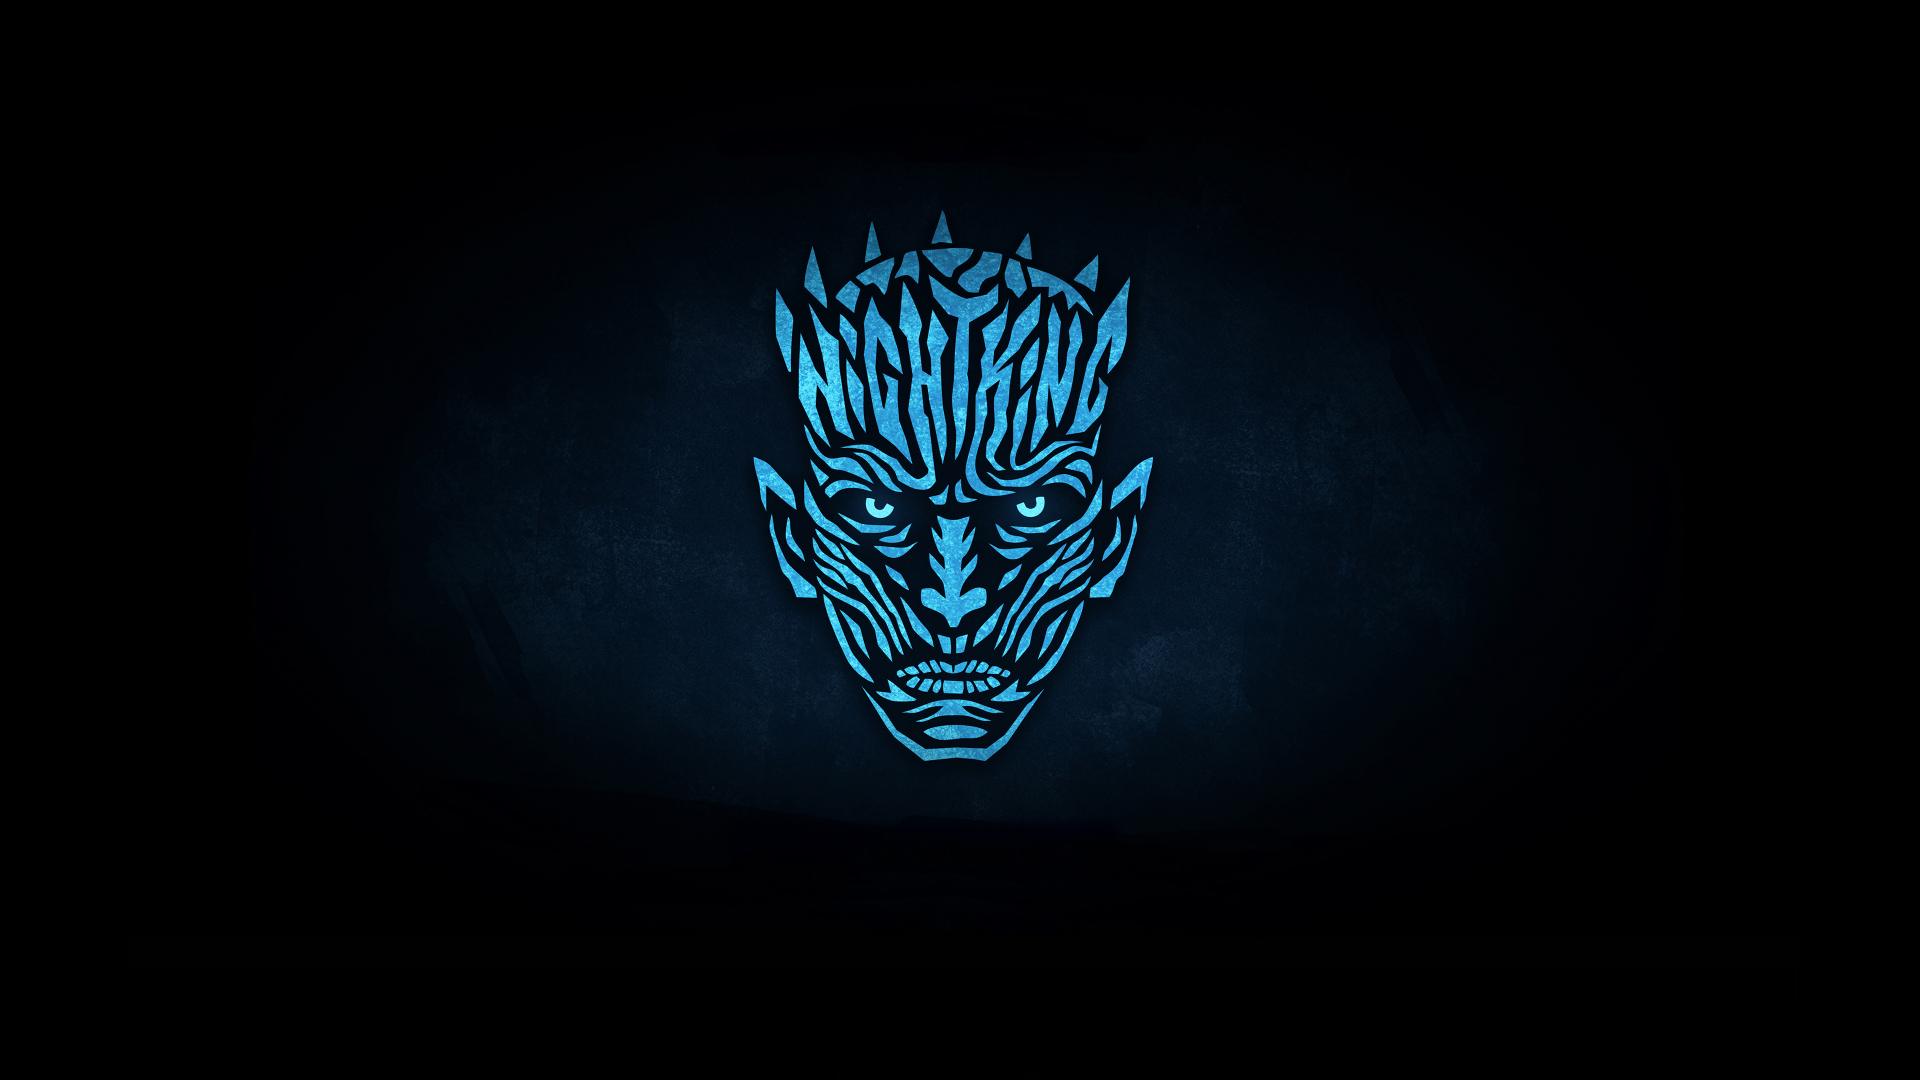 1920x1080 Night King Minimalist From Game Of Thrones 1080p Laptop